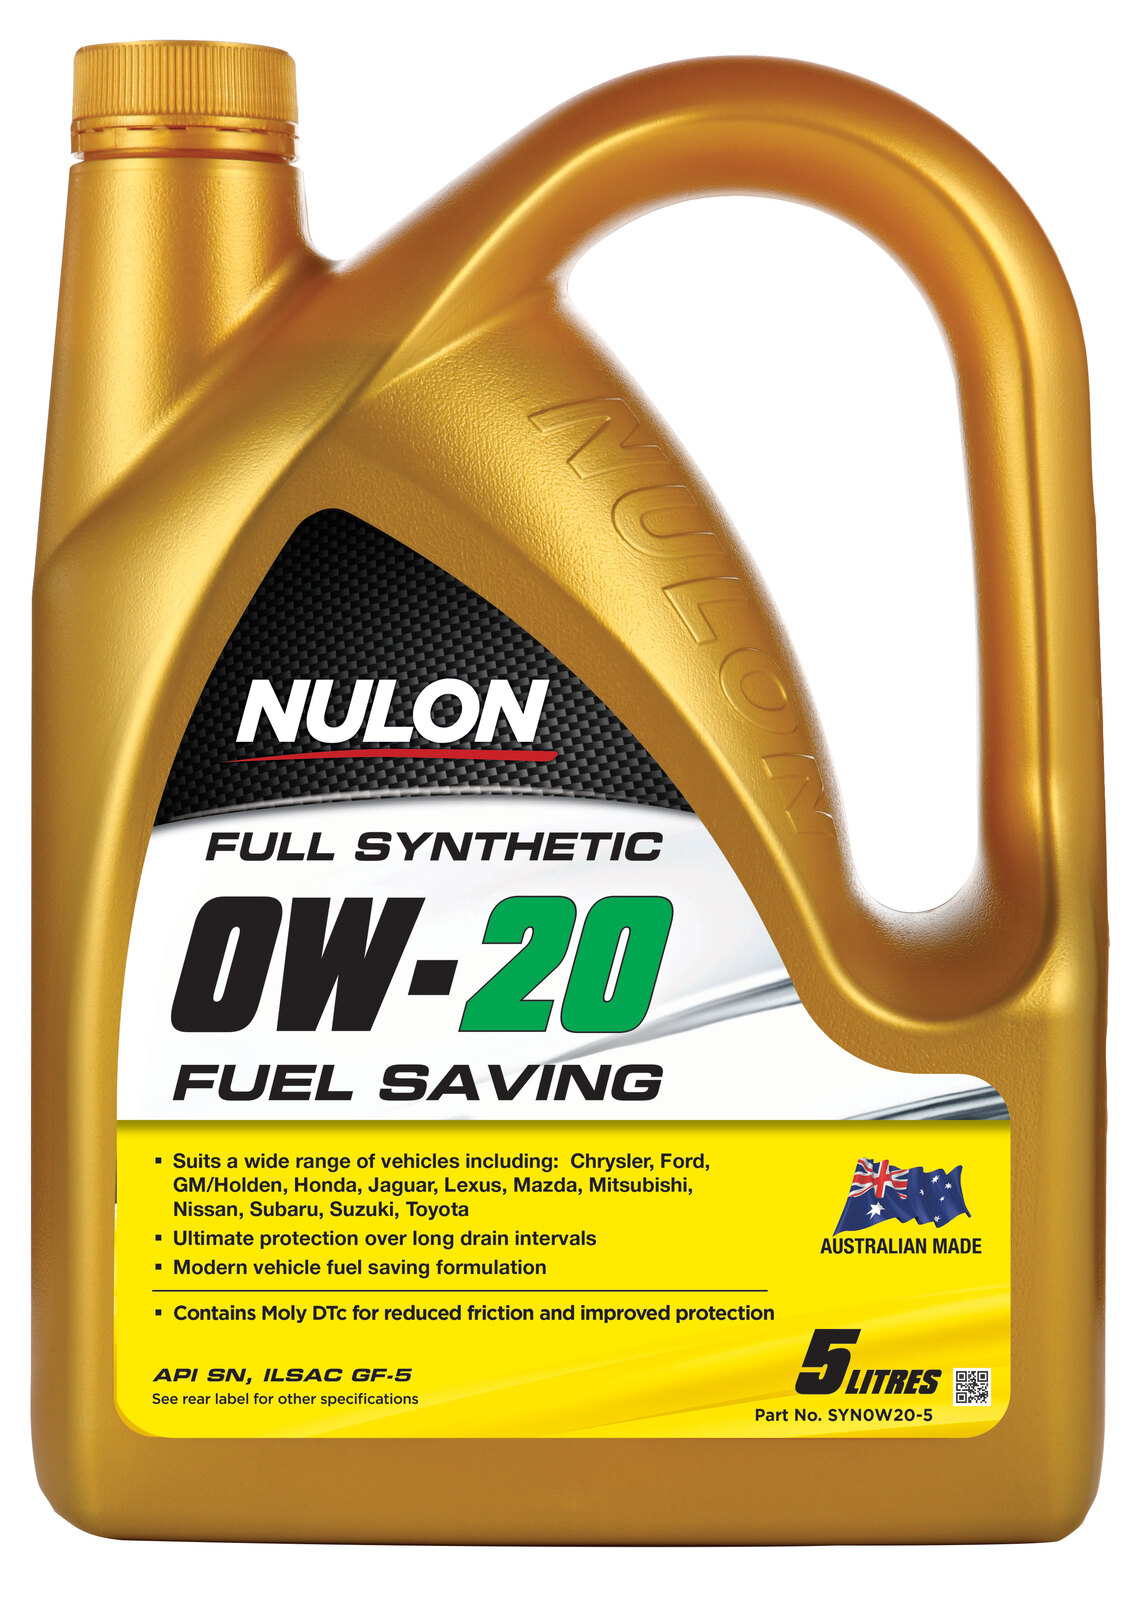 NULON Full Synthetic 0W-20 Fuel Saving Engine Oil, Each